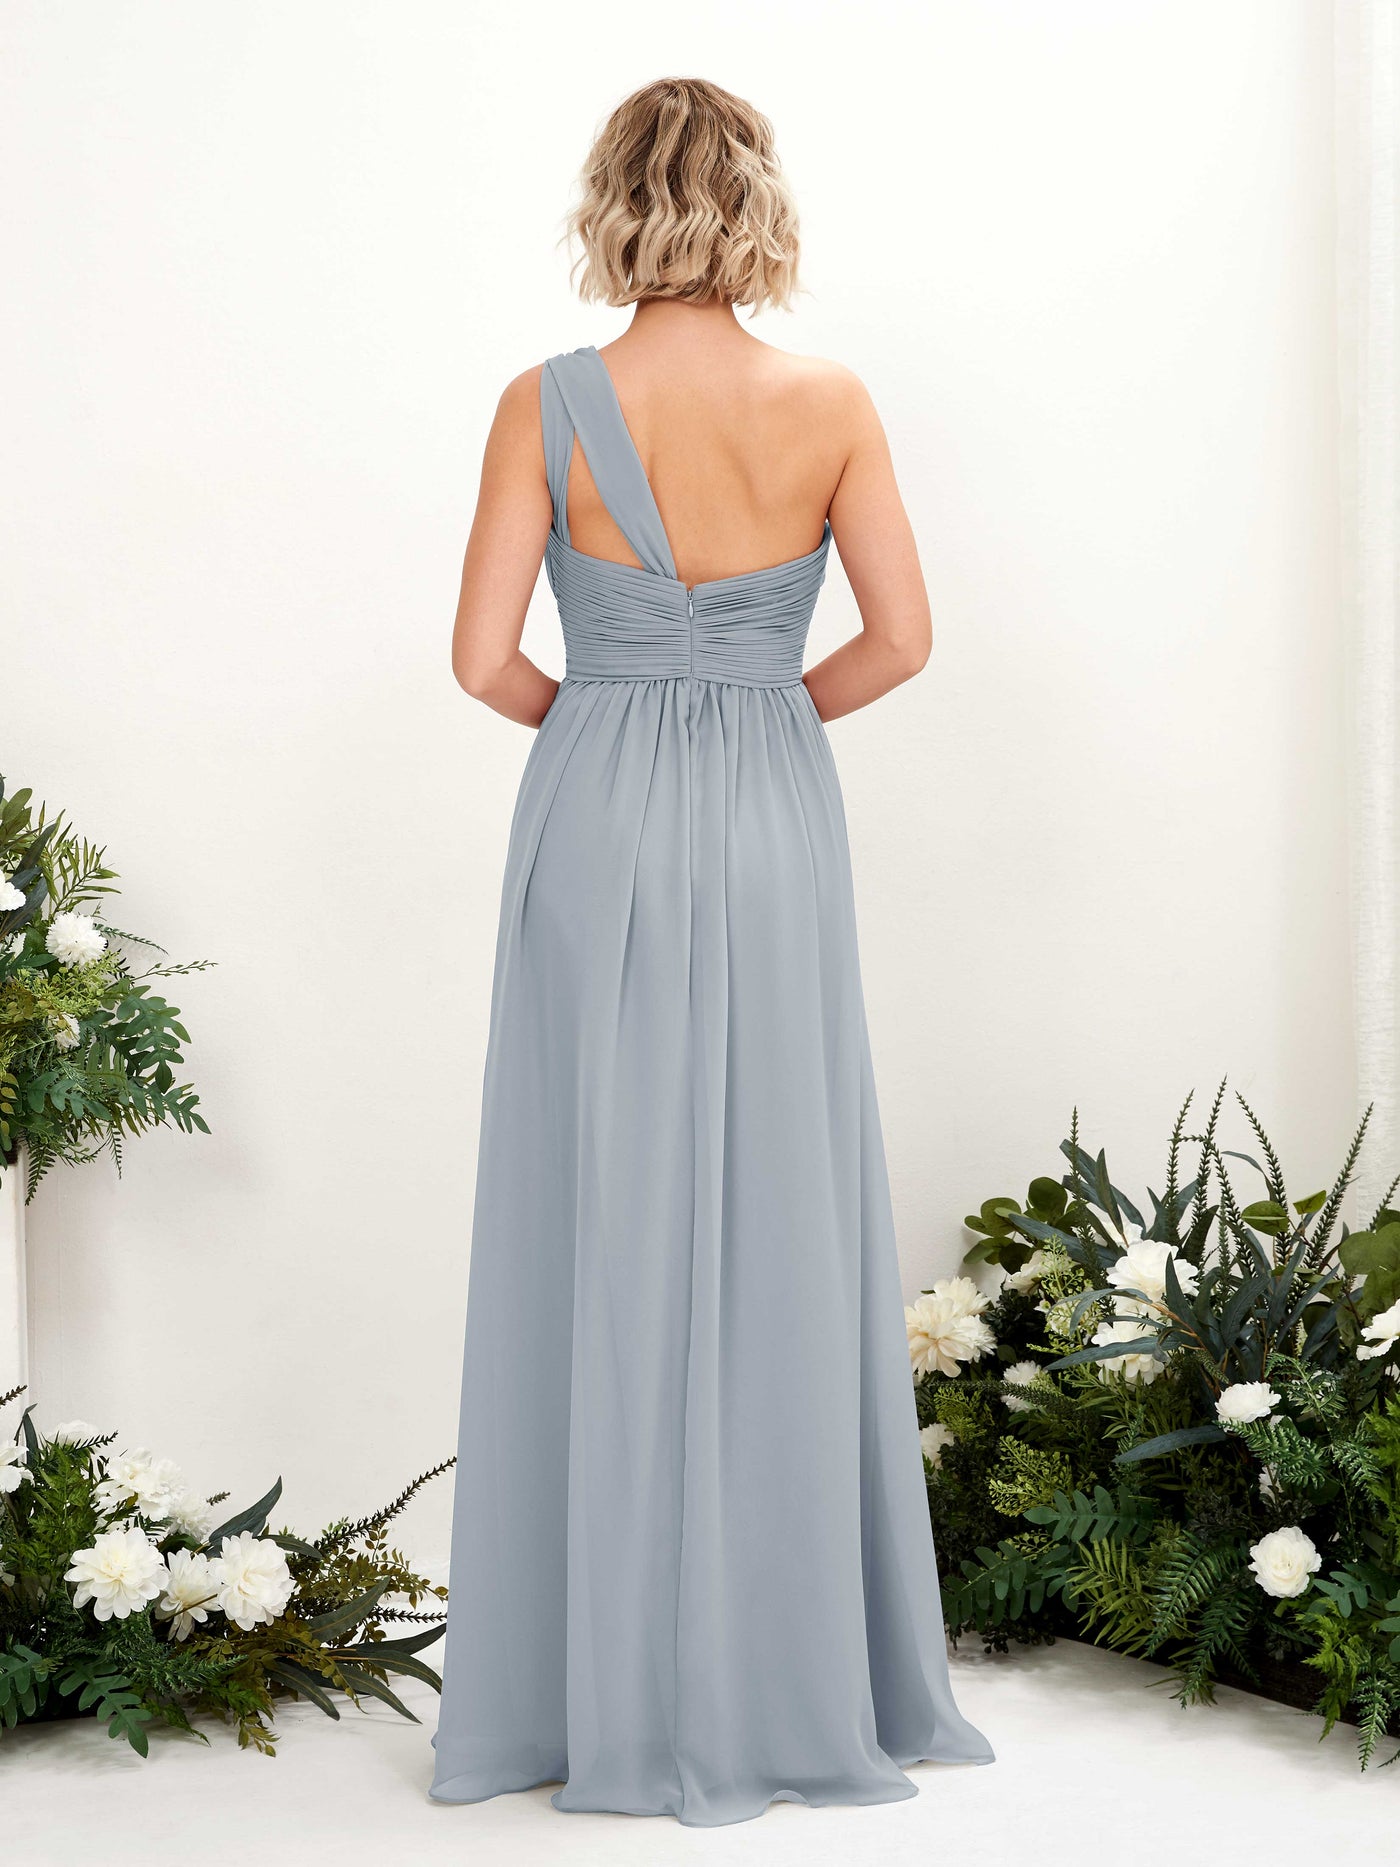 Dusty Blue-Upgrade Bridesmaid Dresses Bridesmaid Dress Ball Gown Chiffon One Shoulder Full Length Sleeveless Wedding Party Dress (81225004)#color_dusty-blue-upgrade